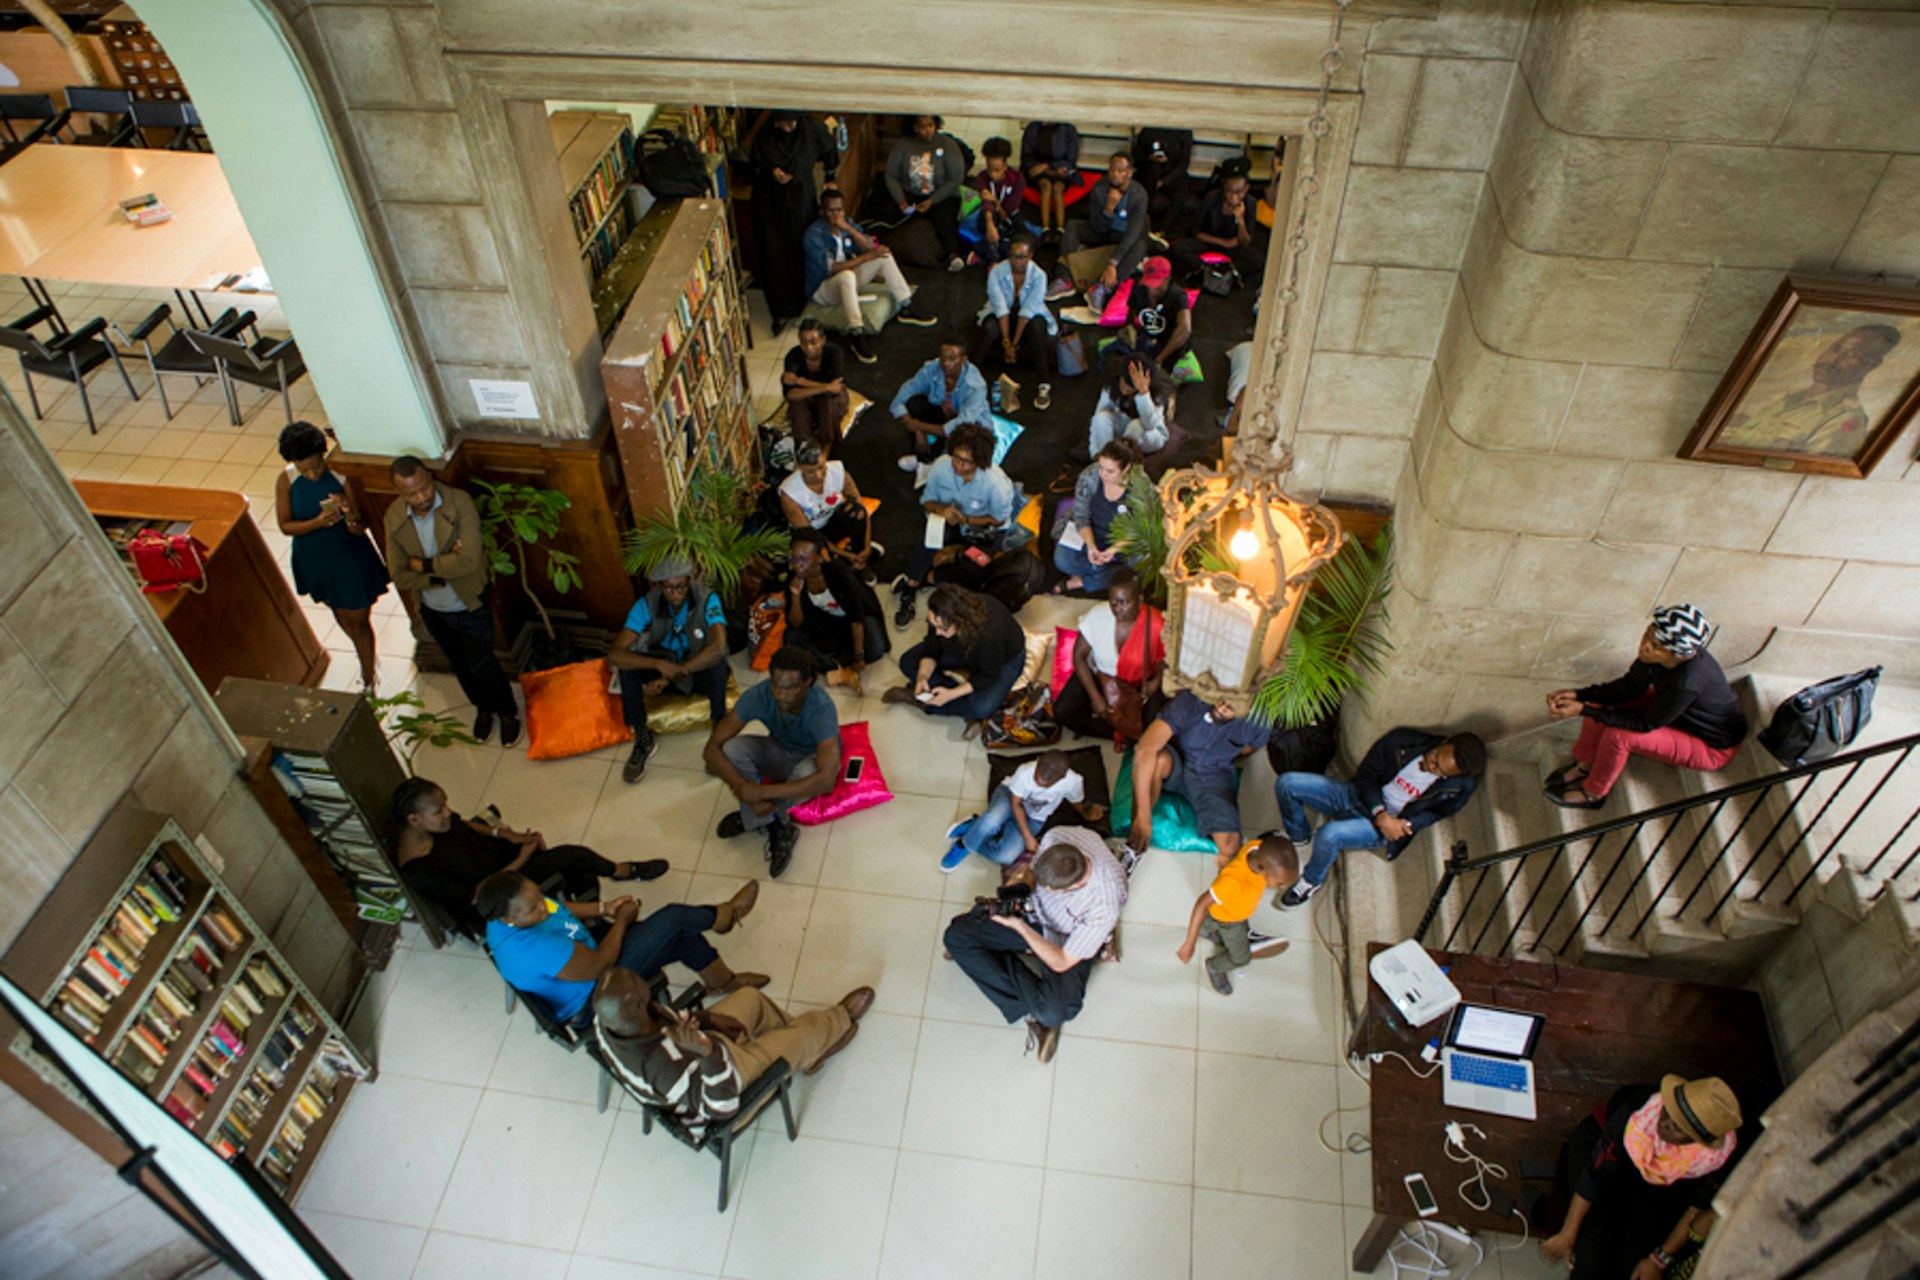 Nairobi June - Shot looking down from a high balcony, a group sits tightly packed on a library floor in front of three speakers sitting in chairs